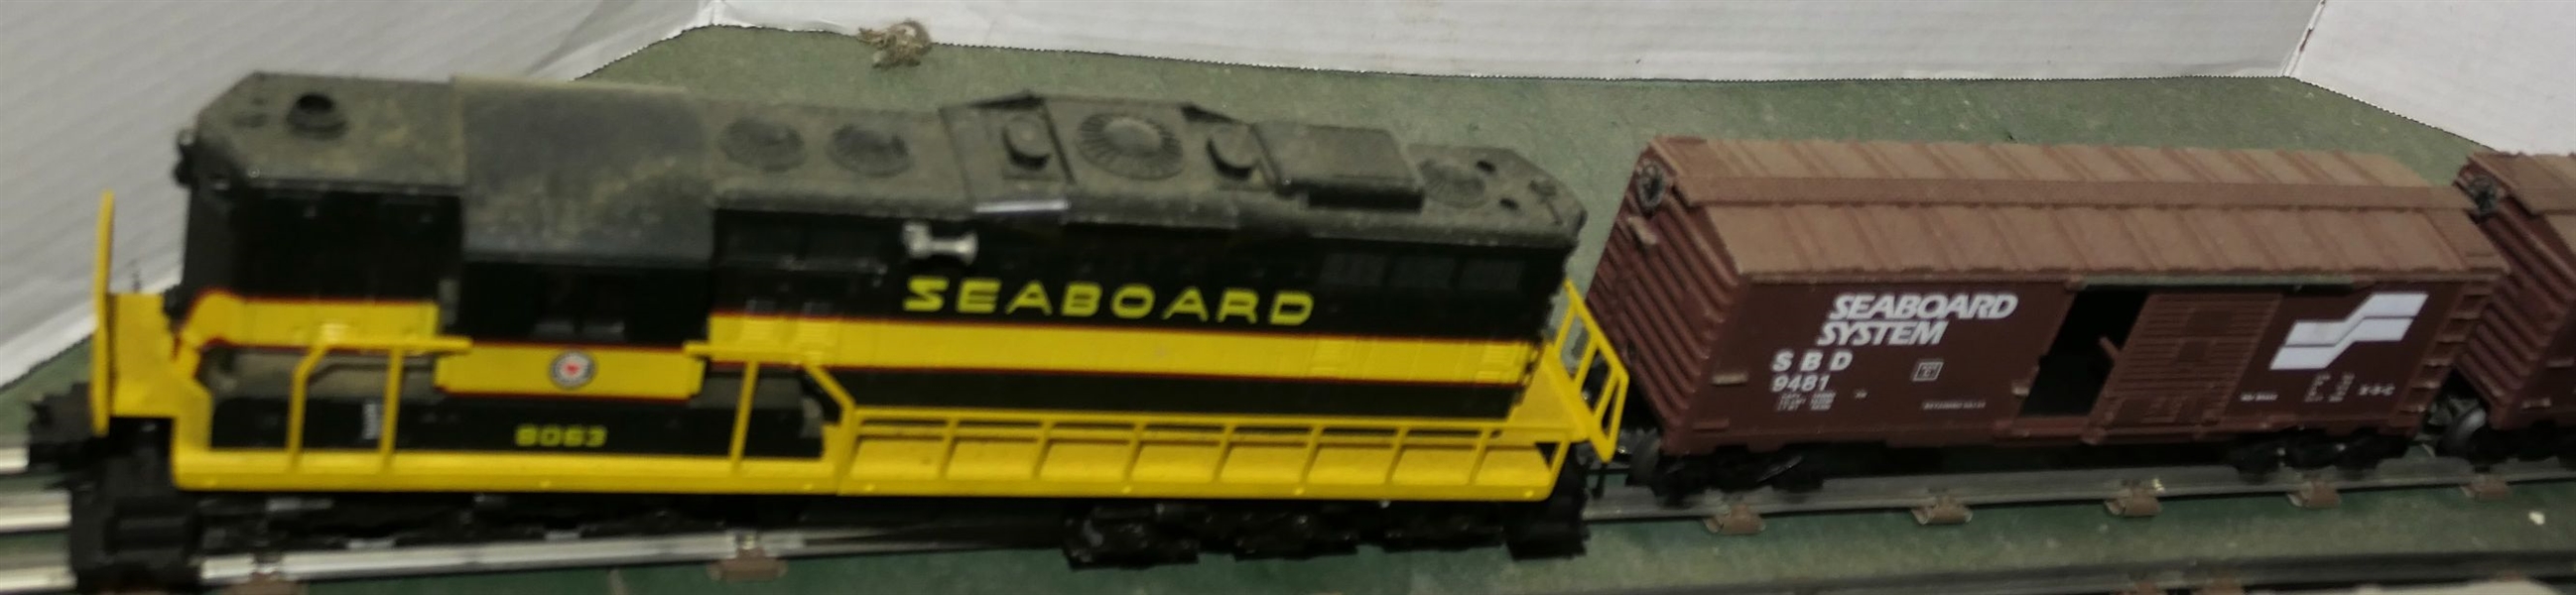 8 Lionel Train Pieces - Seaboard 8063 Engine, Seaboard 9481 Car, Coast Line 9471 Car, Flat Car with 2 Ford Tractors, Sunoco Tanker Car, Southern Tanker Car, Seaboard 9481, and Seaboard 9372 Caboose...